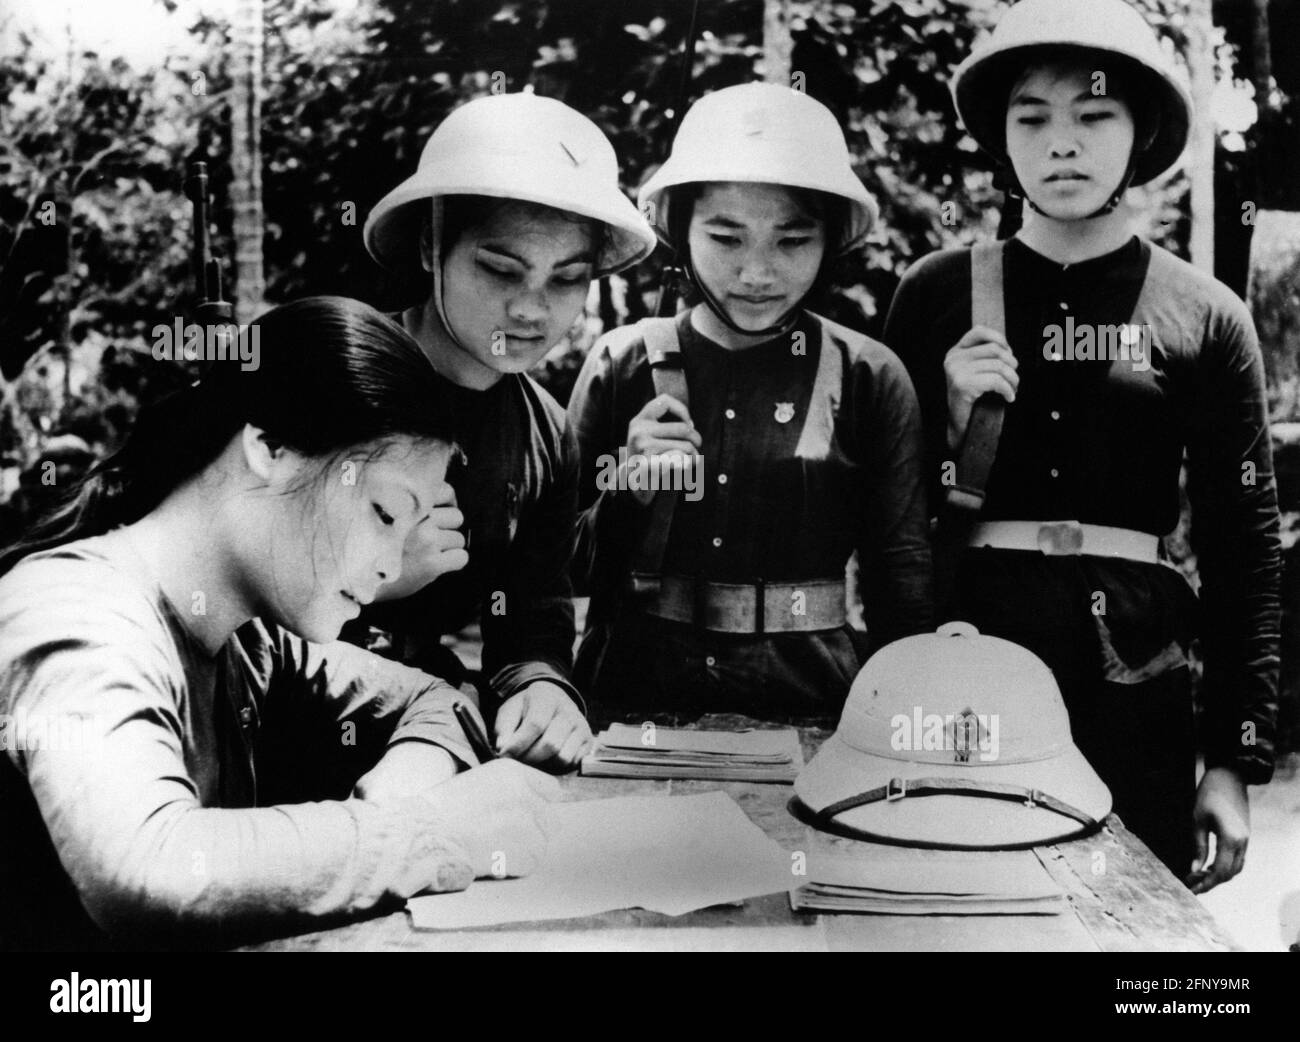 geography/travel, Asia, Vietnam, Viet Nam, War, young women, military, North Vietnam, Hanoi, 1965, ADDITIONAL-RIGHTS-CLEARANCE-INFO-NOT-AVAILABLE Stock Photo